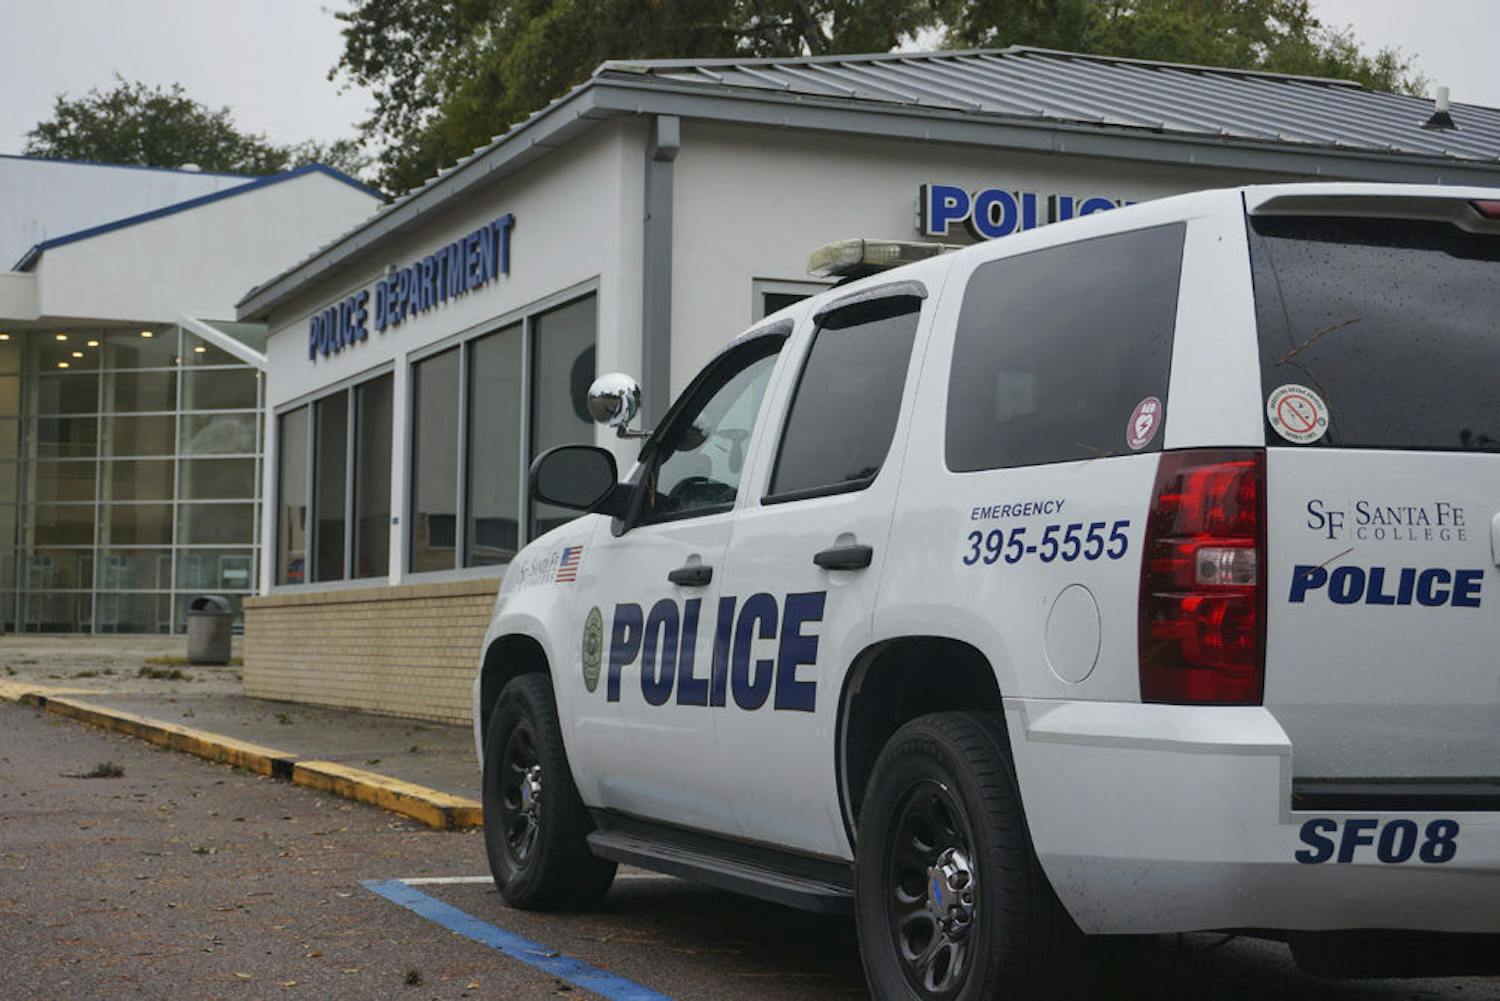 A police vehicle sits outside the Santa Fe Police Station on Monday, Nov. 18, 2014.&nbsp;